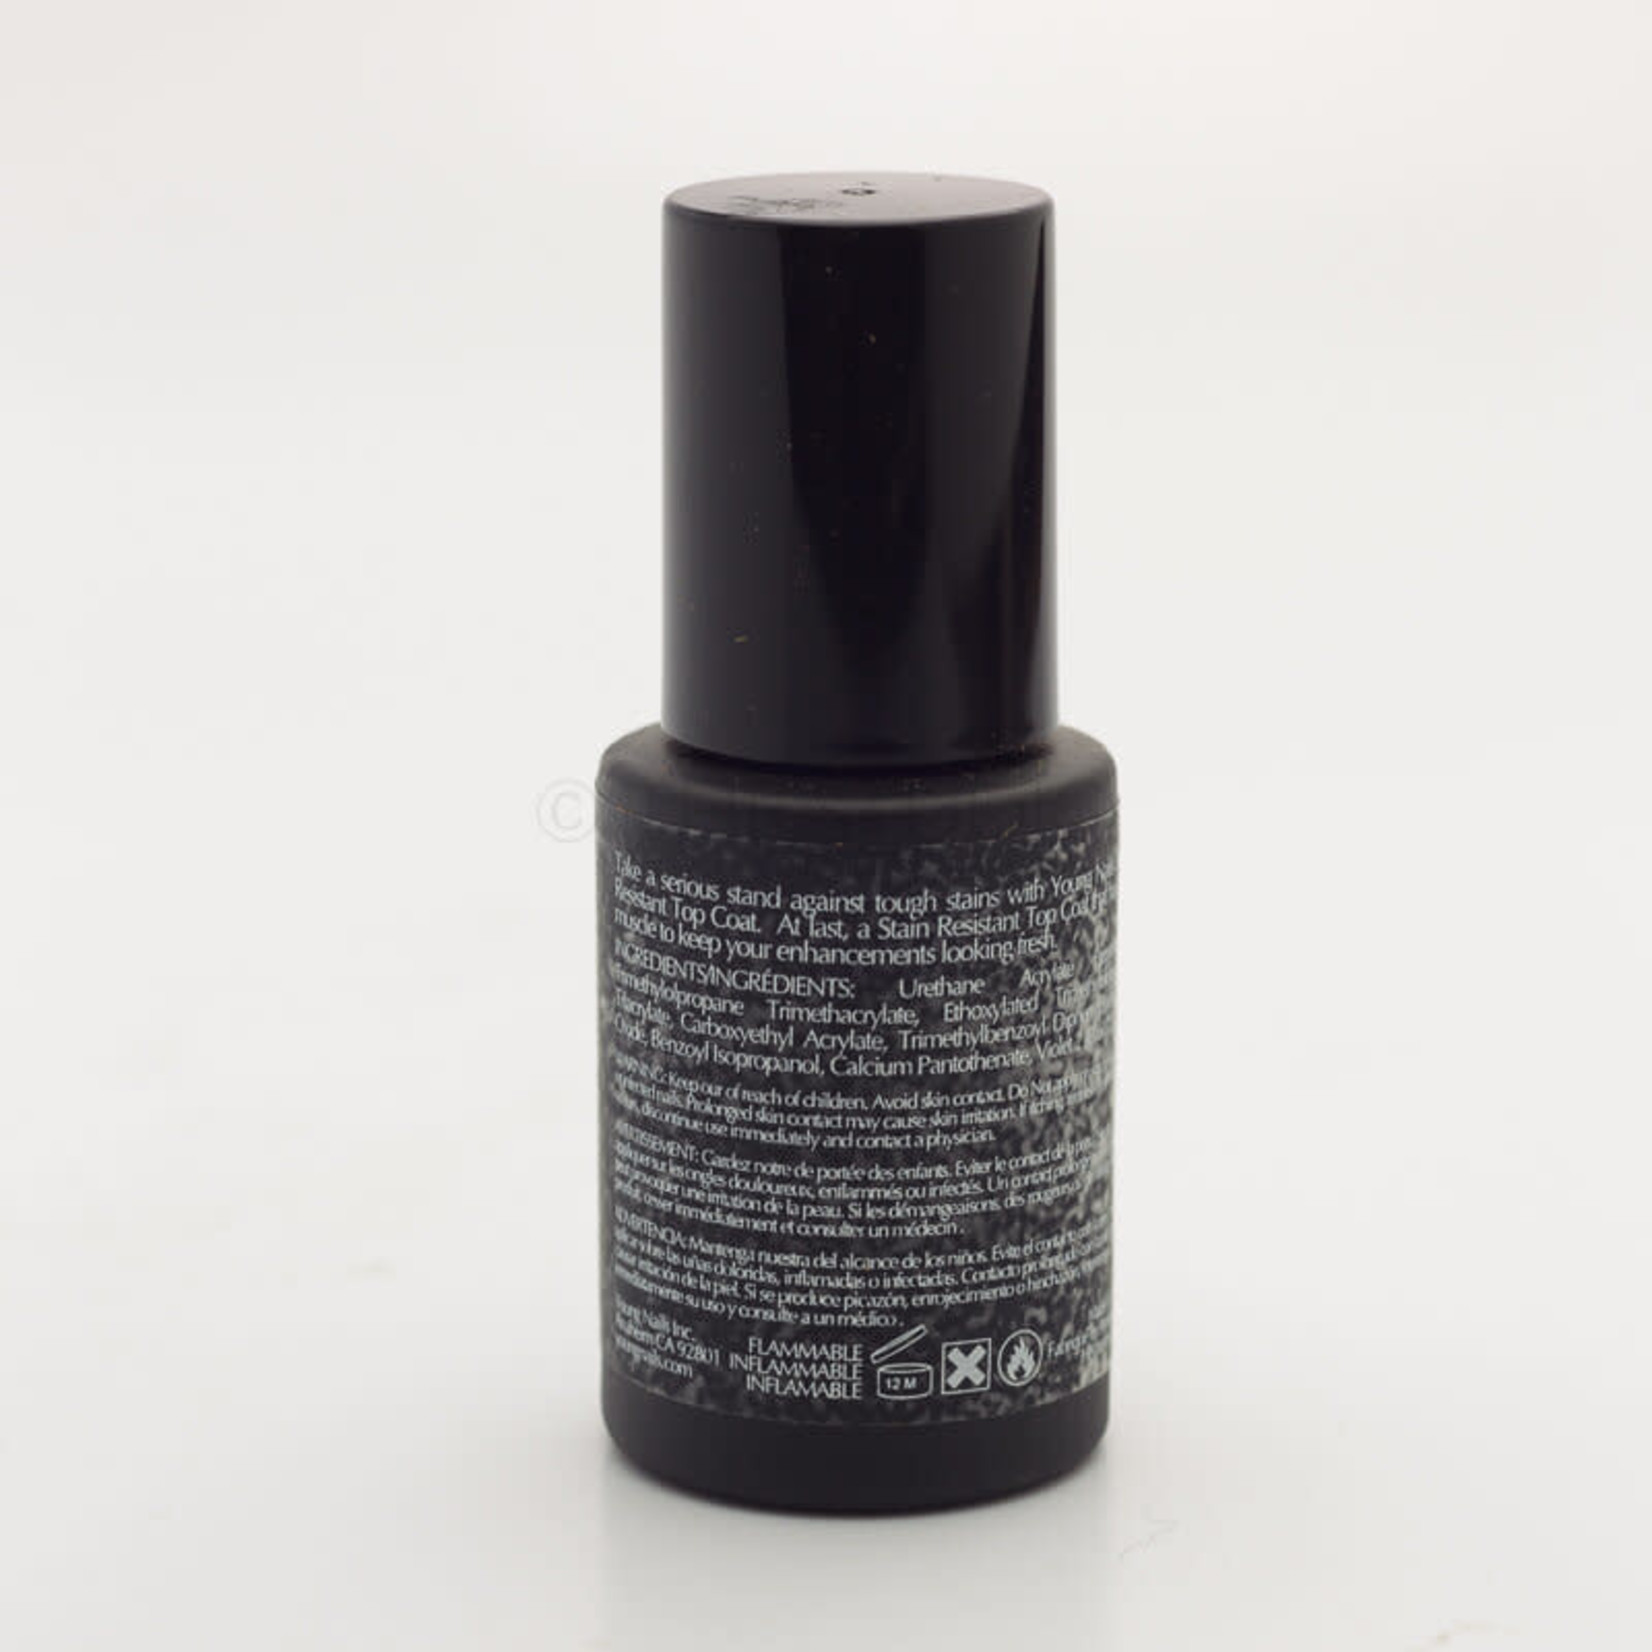 Young Nails Young Nails - Gel - Stain Resistant Top Coat - 0.34 oz